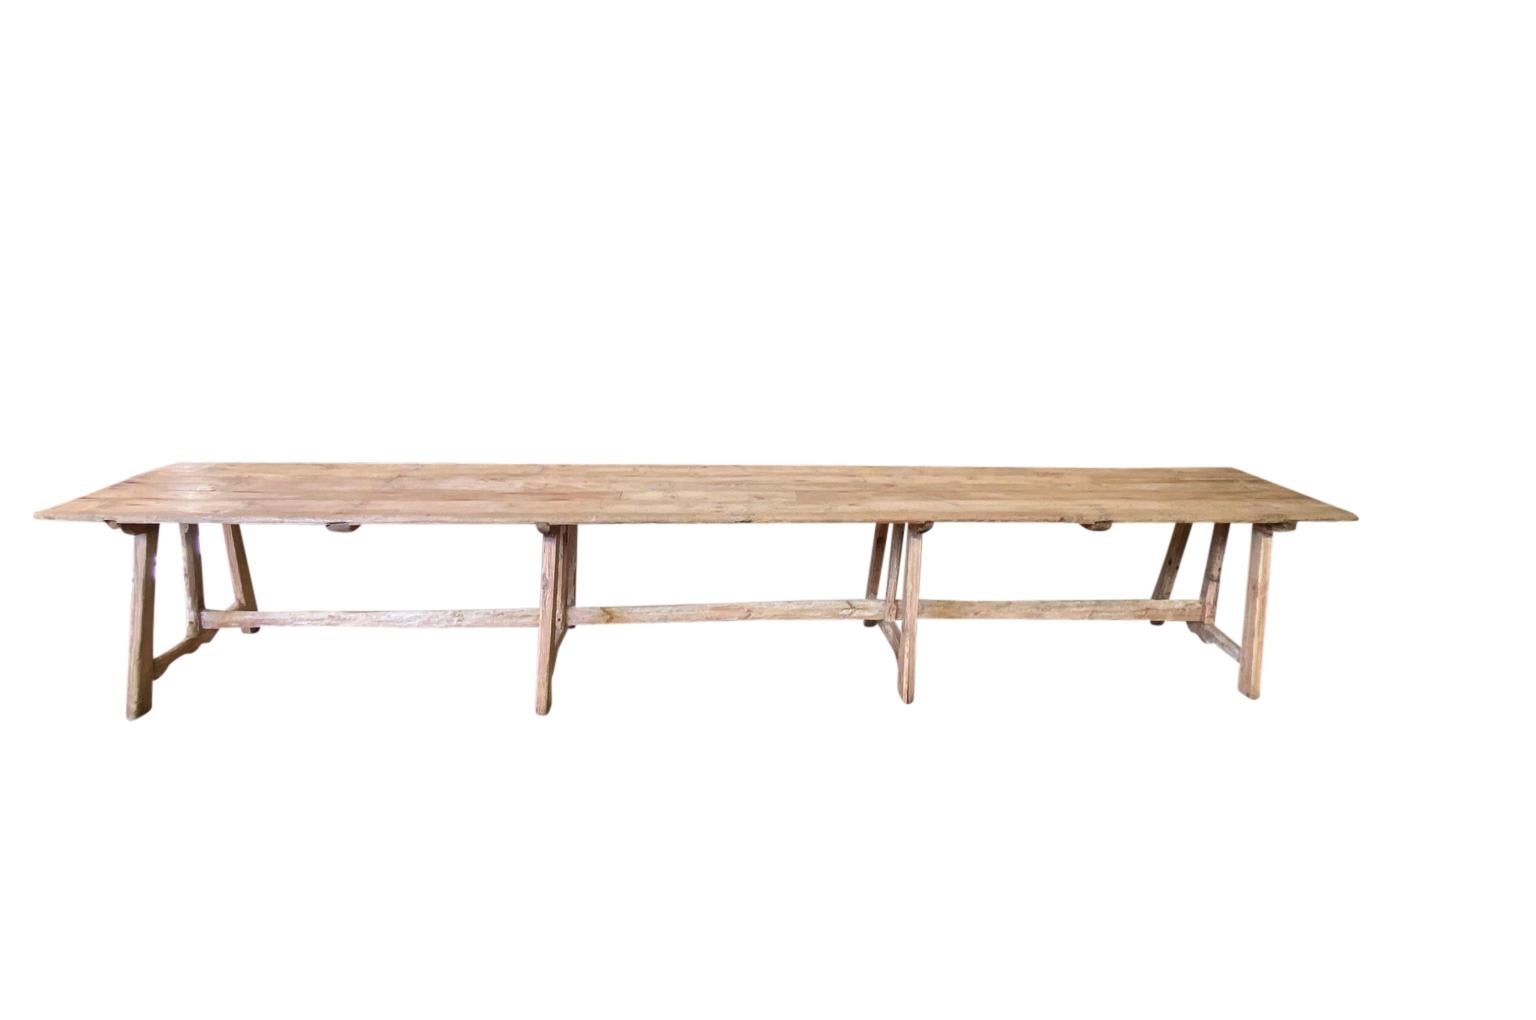 A stunning and very grand scale Farm table - dining table from the Catalan region of Spain. Beautifully constructed from Meleze - a very hard pine. Sensational patina. A perfect dining table for large family gatherings.